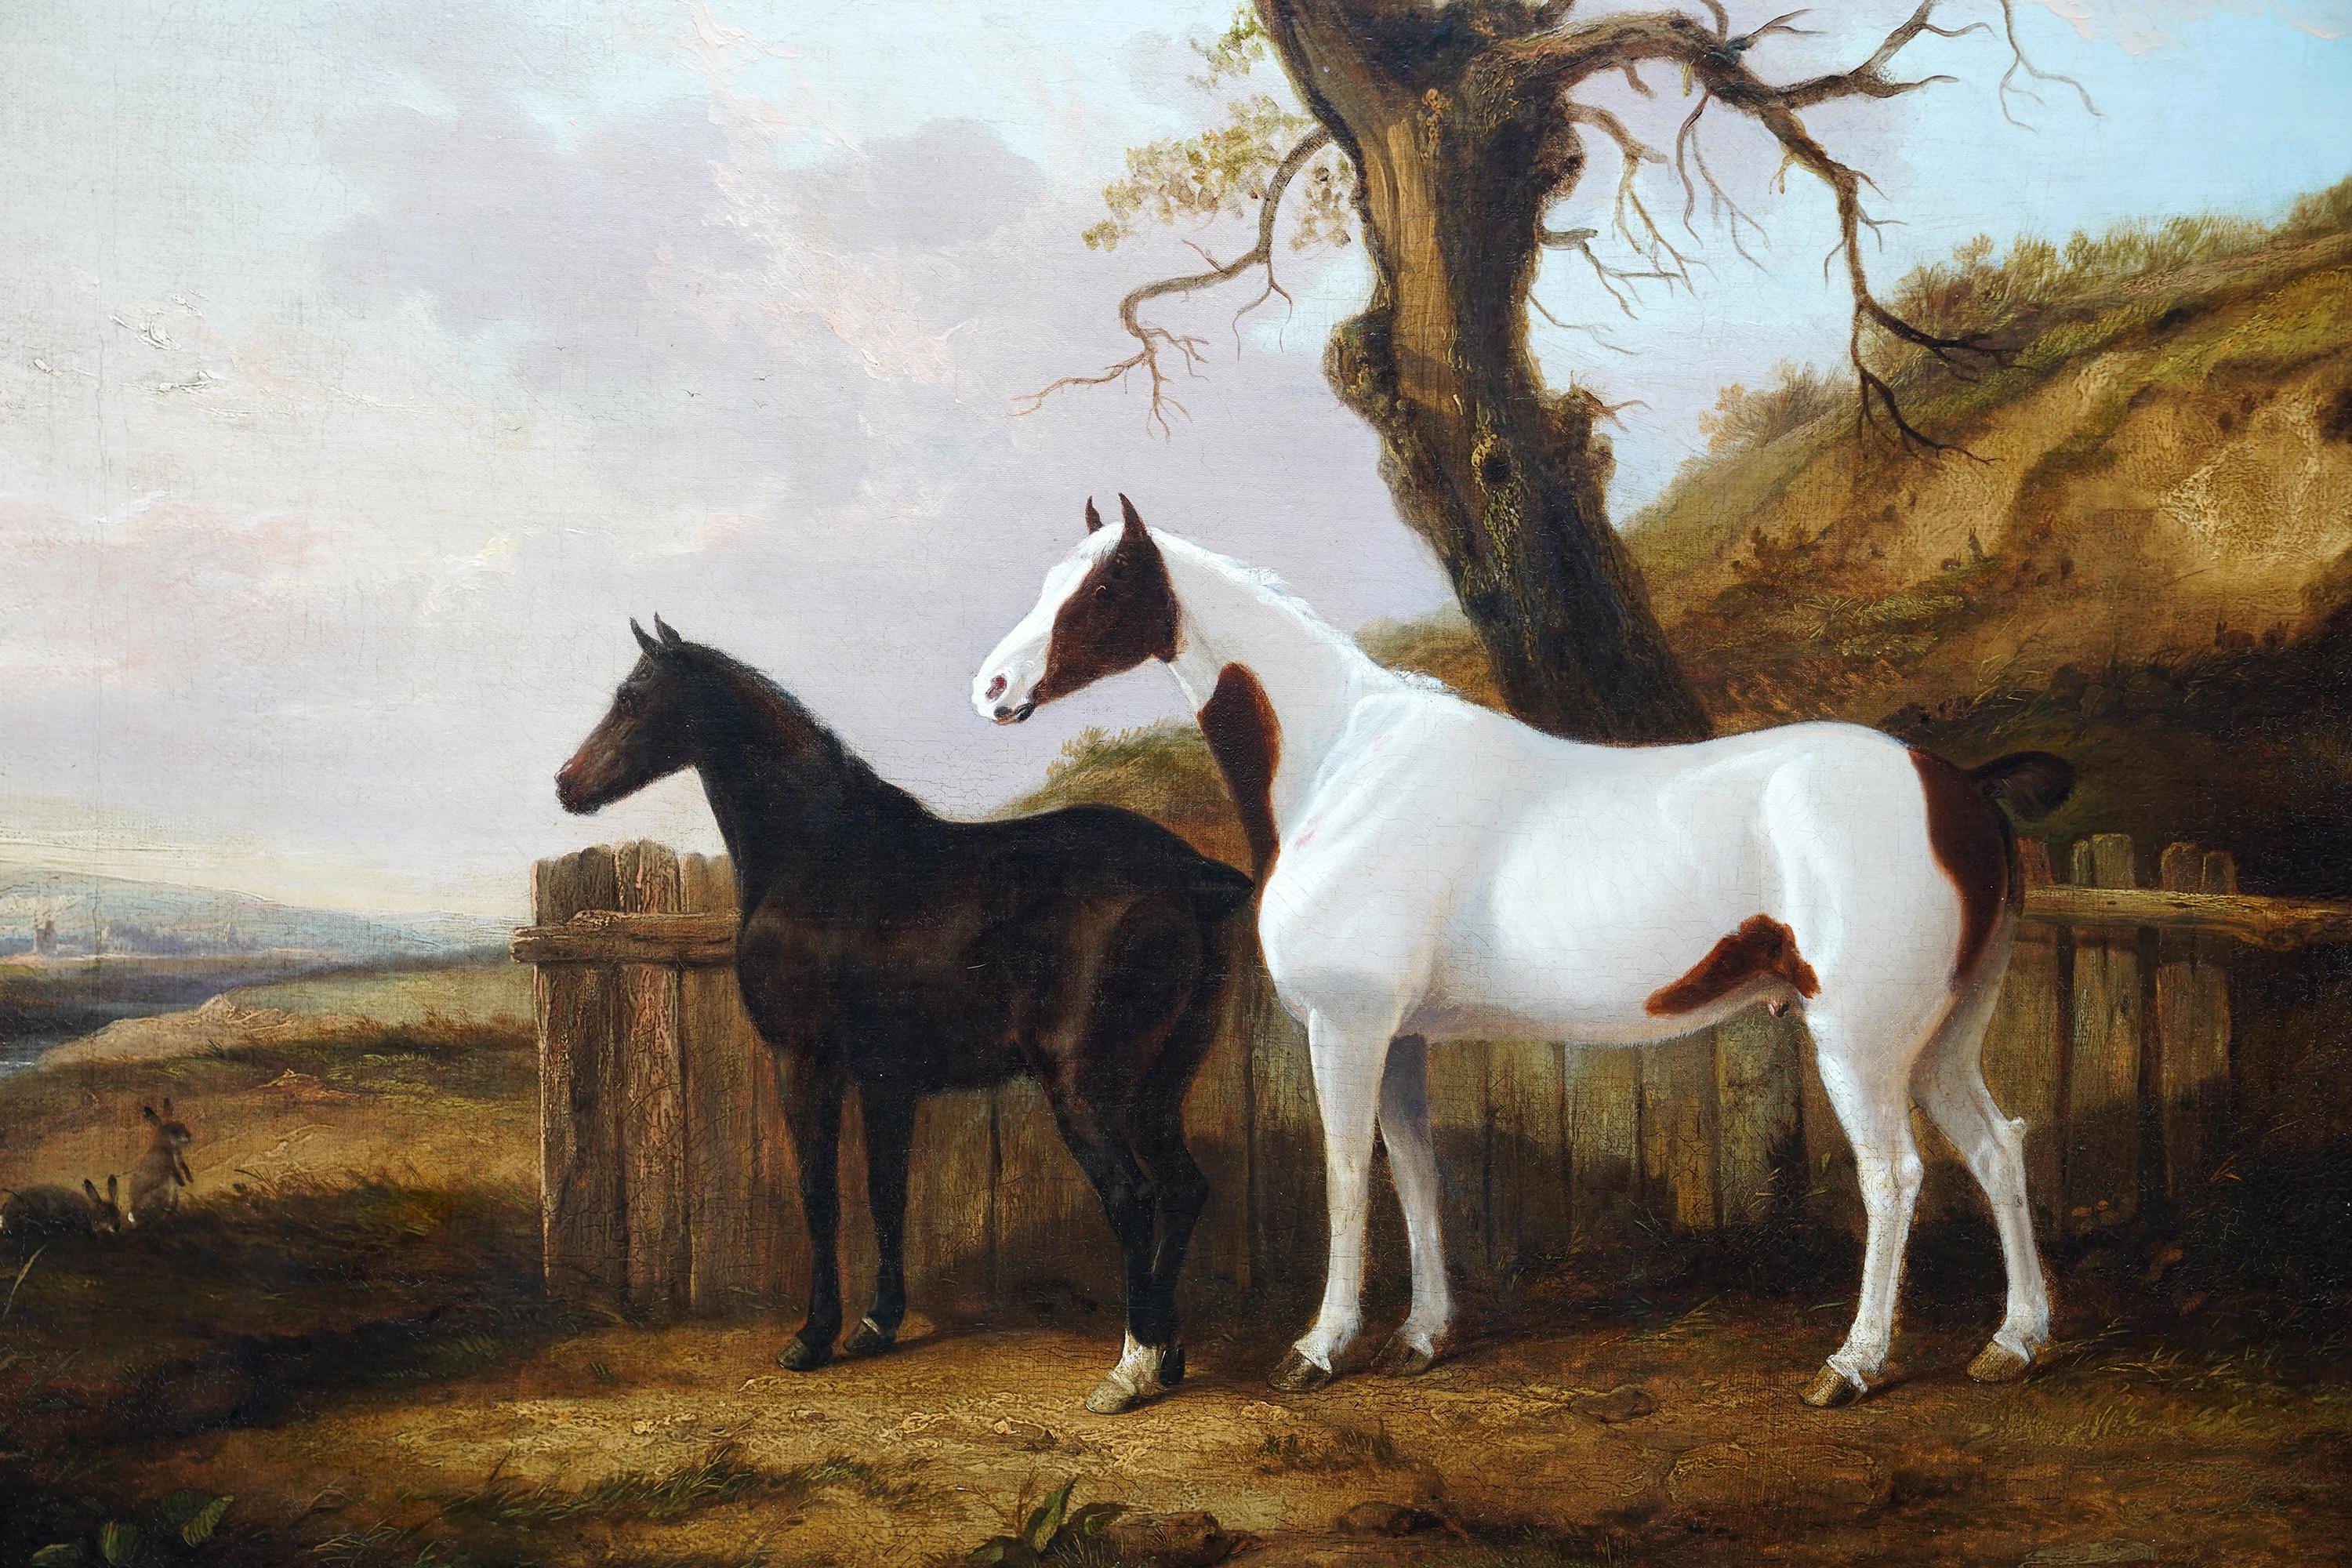 Portrait of Two Horses in a Landscape - British 19thC equine art oil painting - Victorian Painting by George Cole